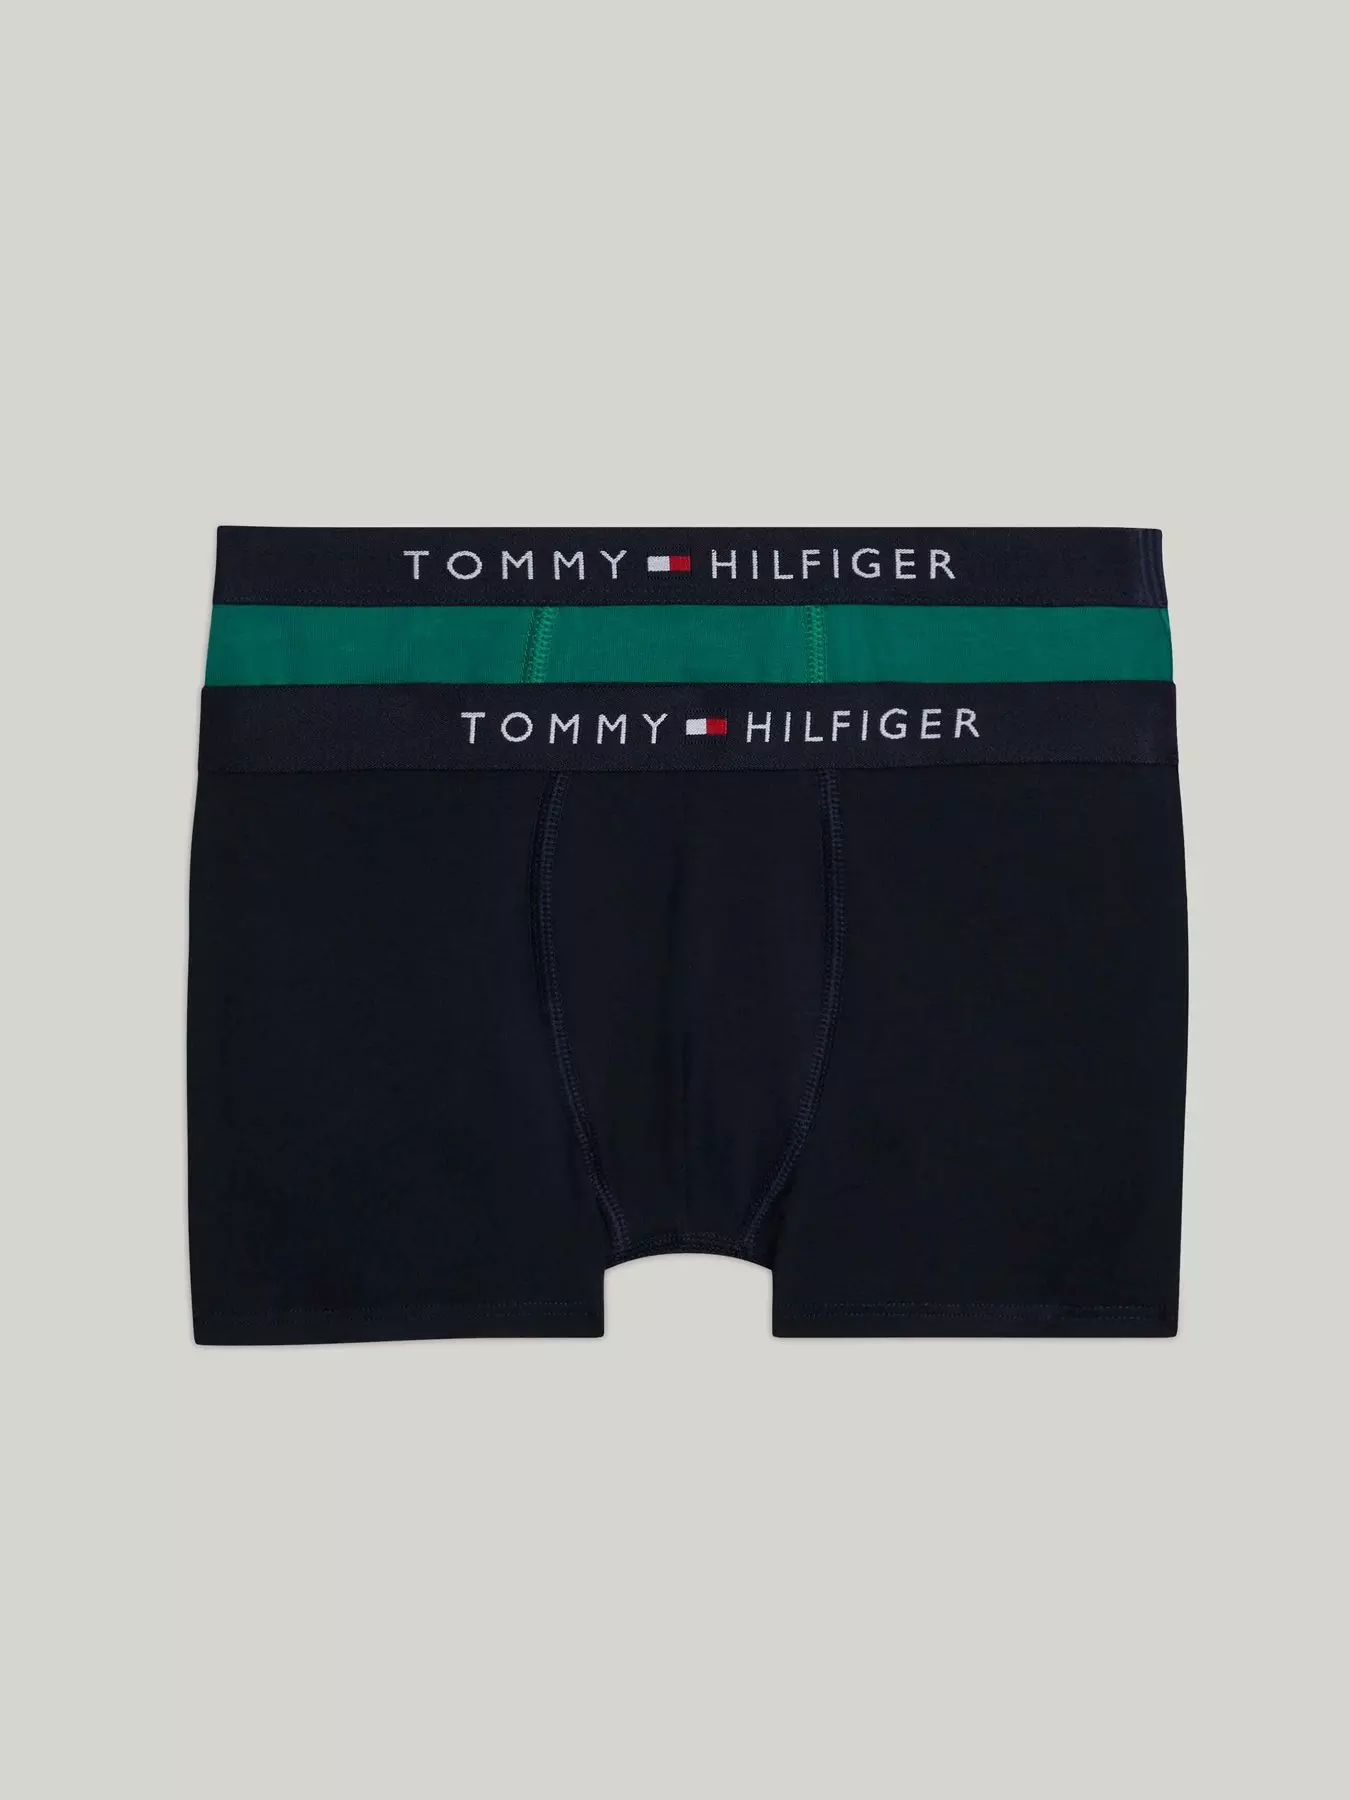 Tommy Hilfiger Boxershorts 7-pack Desert Sky/Mid Grey/Red/White